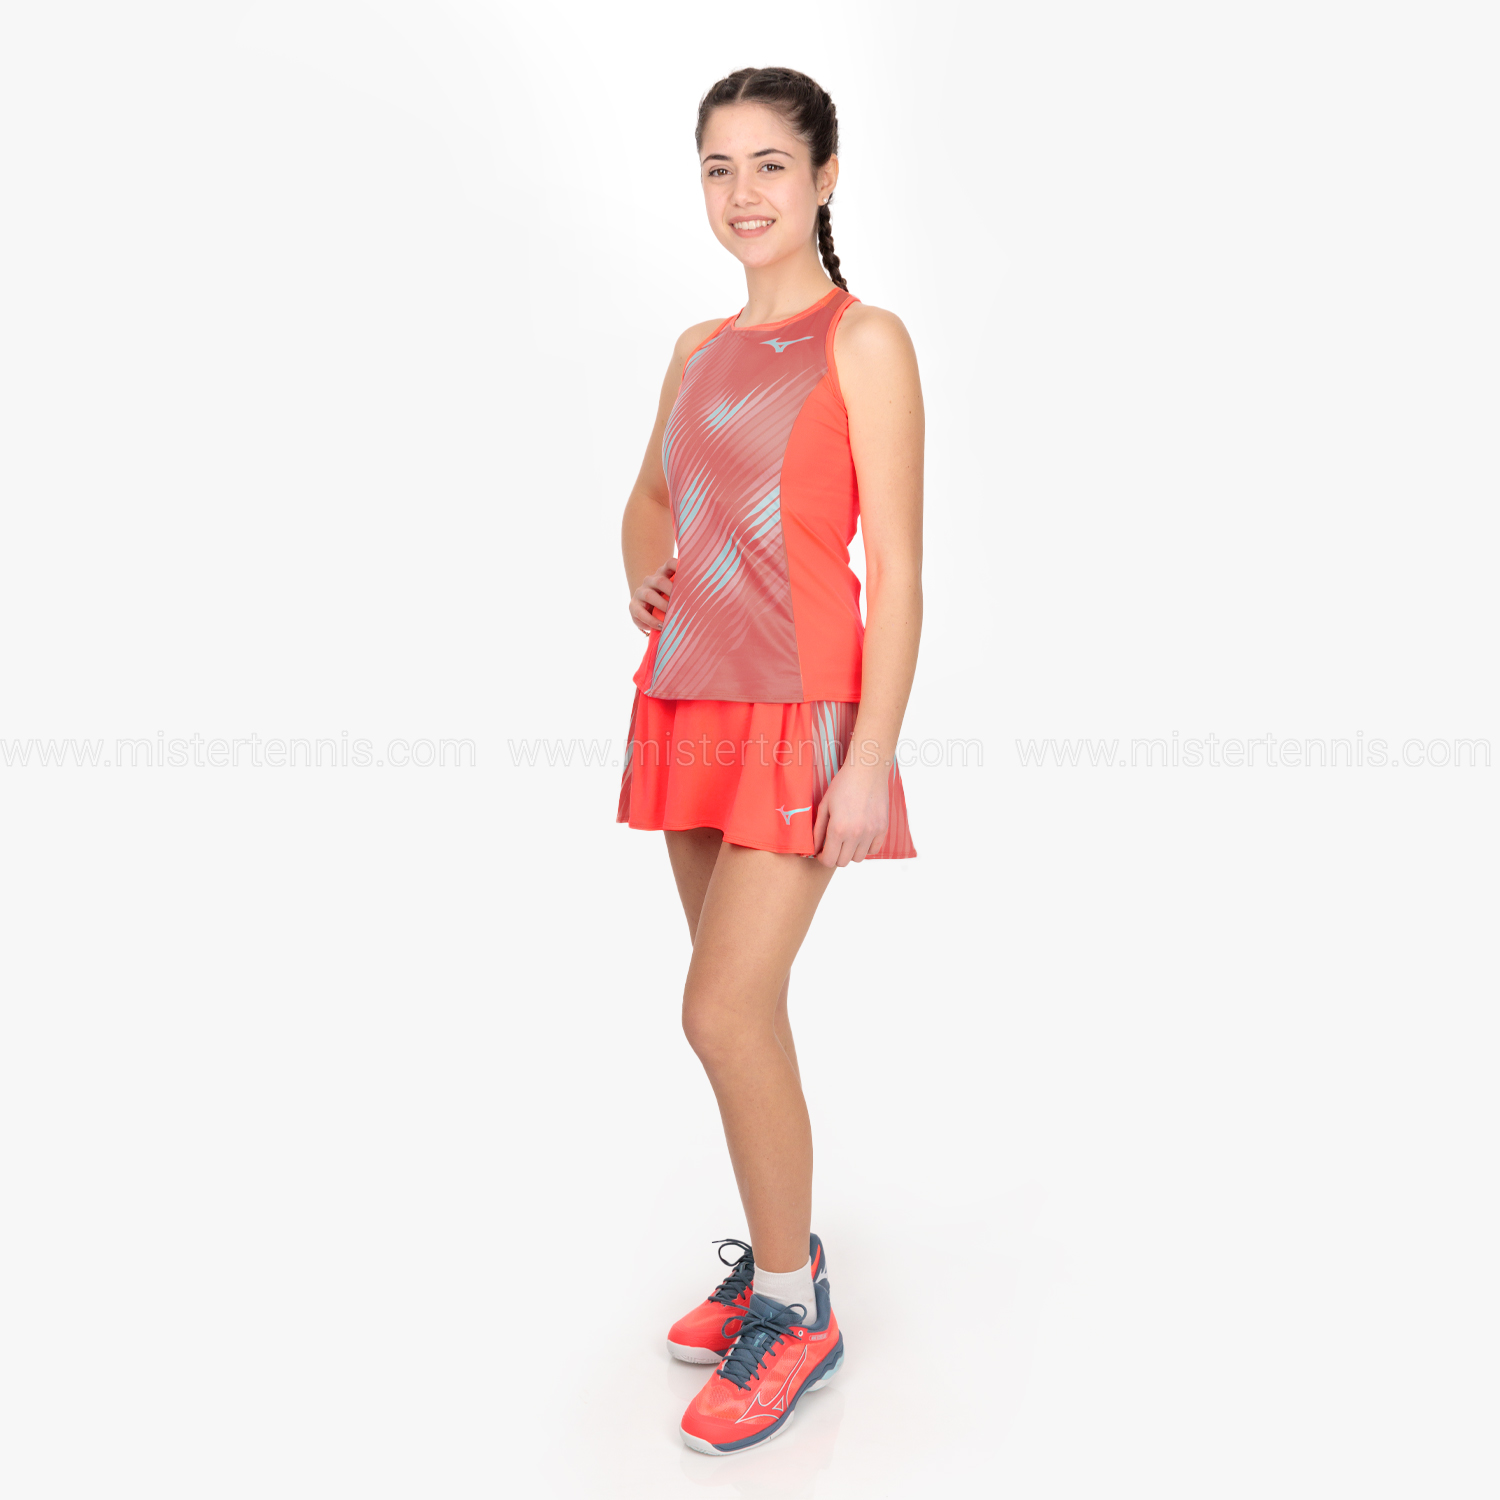 Mizuno Printed Top - Fierry Coral